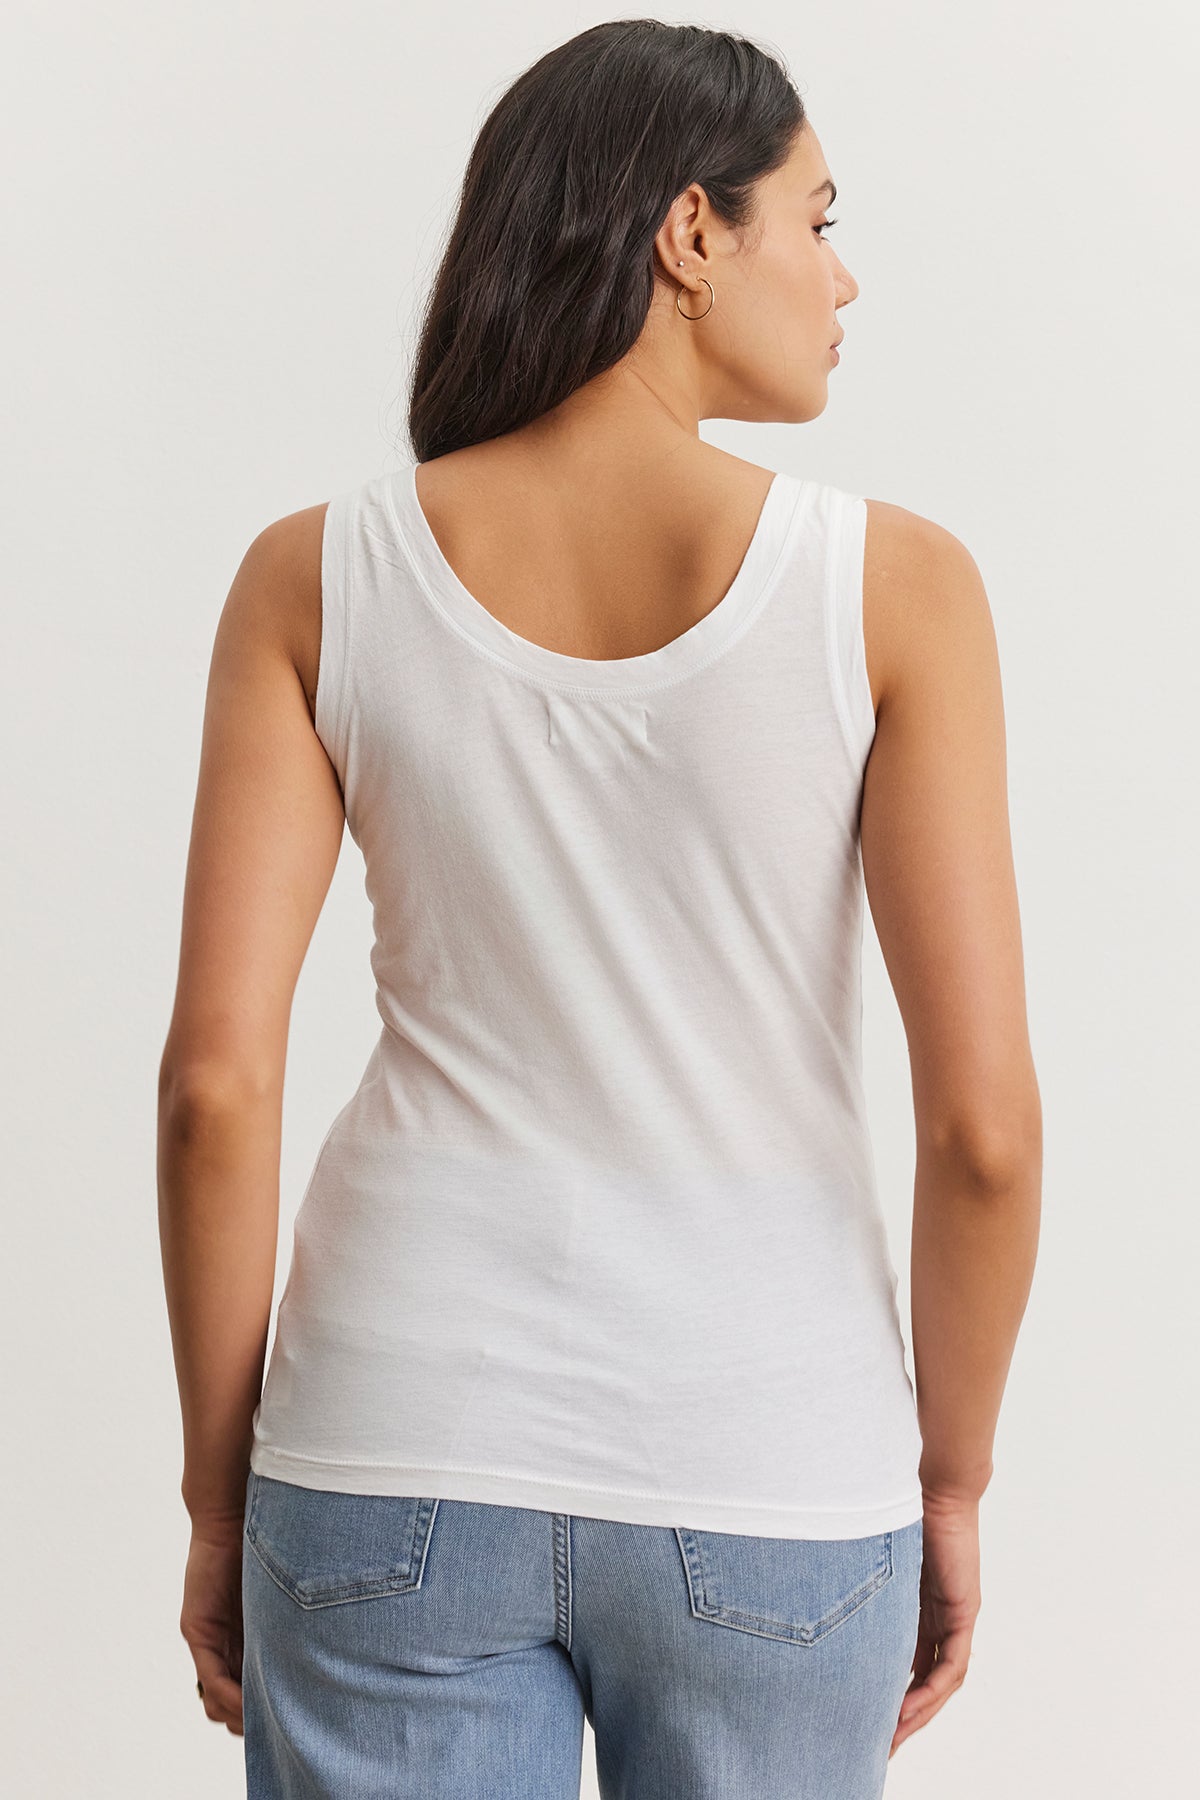 A woman with long dark hair is standing with her back to the camera, wearing a white fitted MOSSY TANK TOP by Velvet by Graham & Spencer and blue jeans, showcasing a versatile wardrobe.-36984053170369